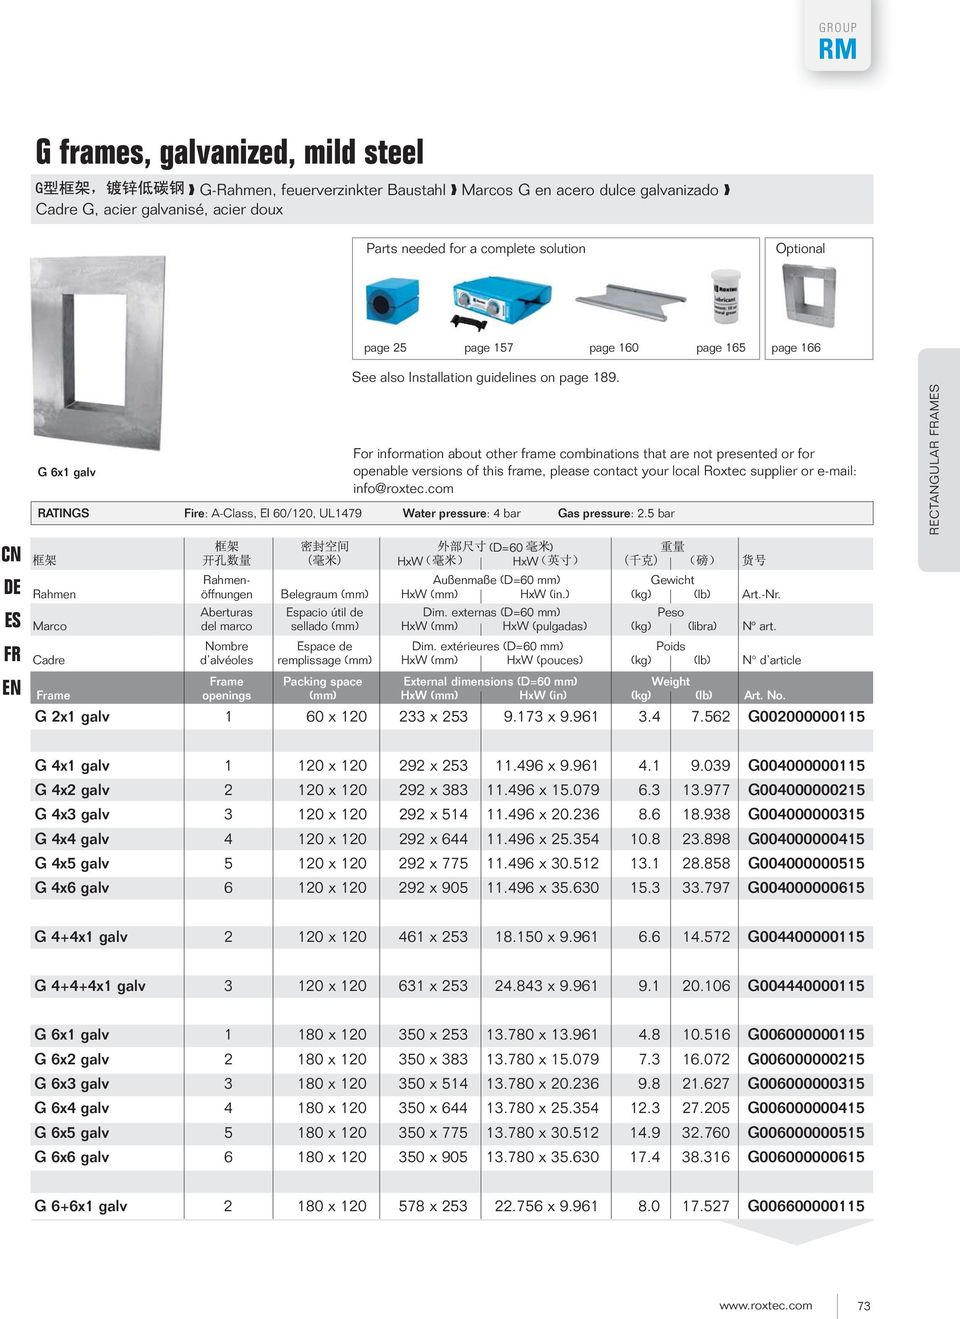 For information about other frame combinations that are not presented or for openable versions of this frame, please contact your local Roxtec supplier or e-mail: info@roxtec.